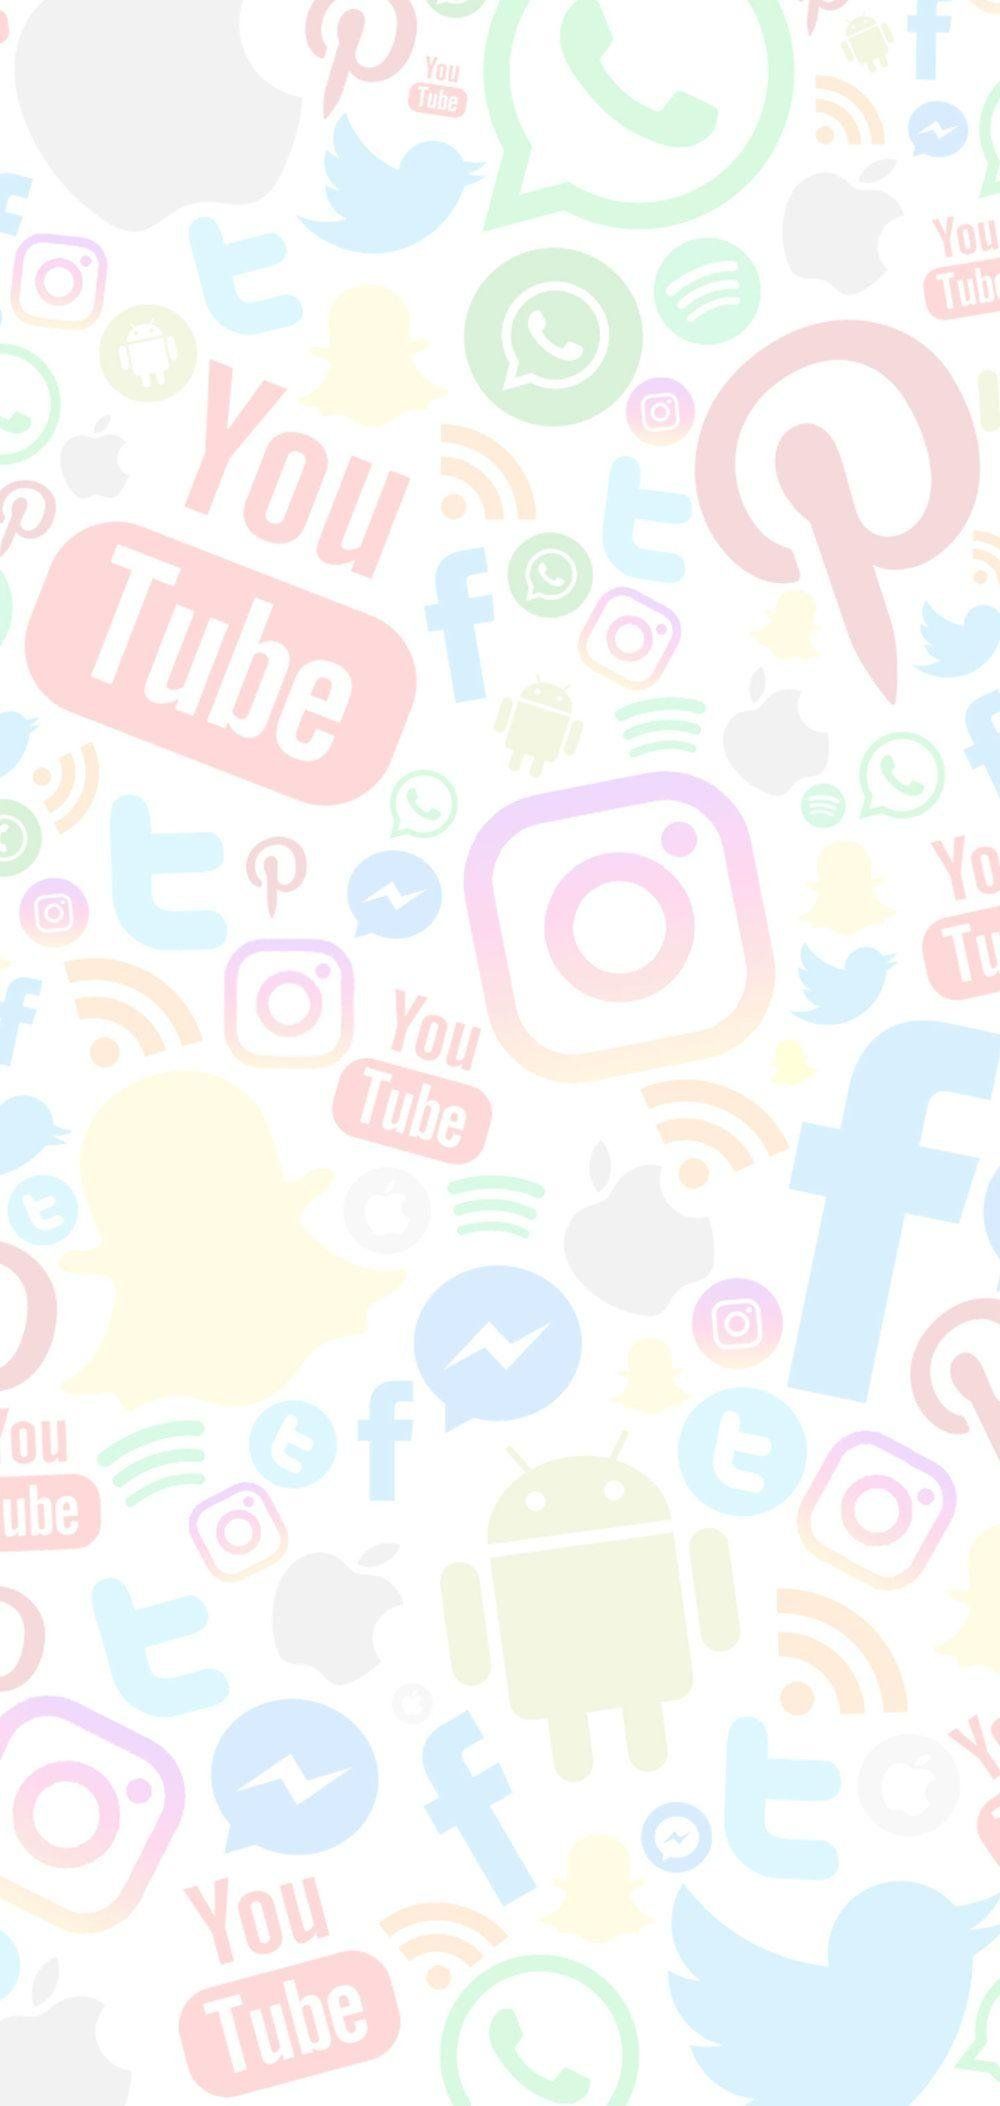 A colorful collage of social media logos including YouTube, Instagram, and Facebook. - YouTube